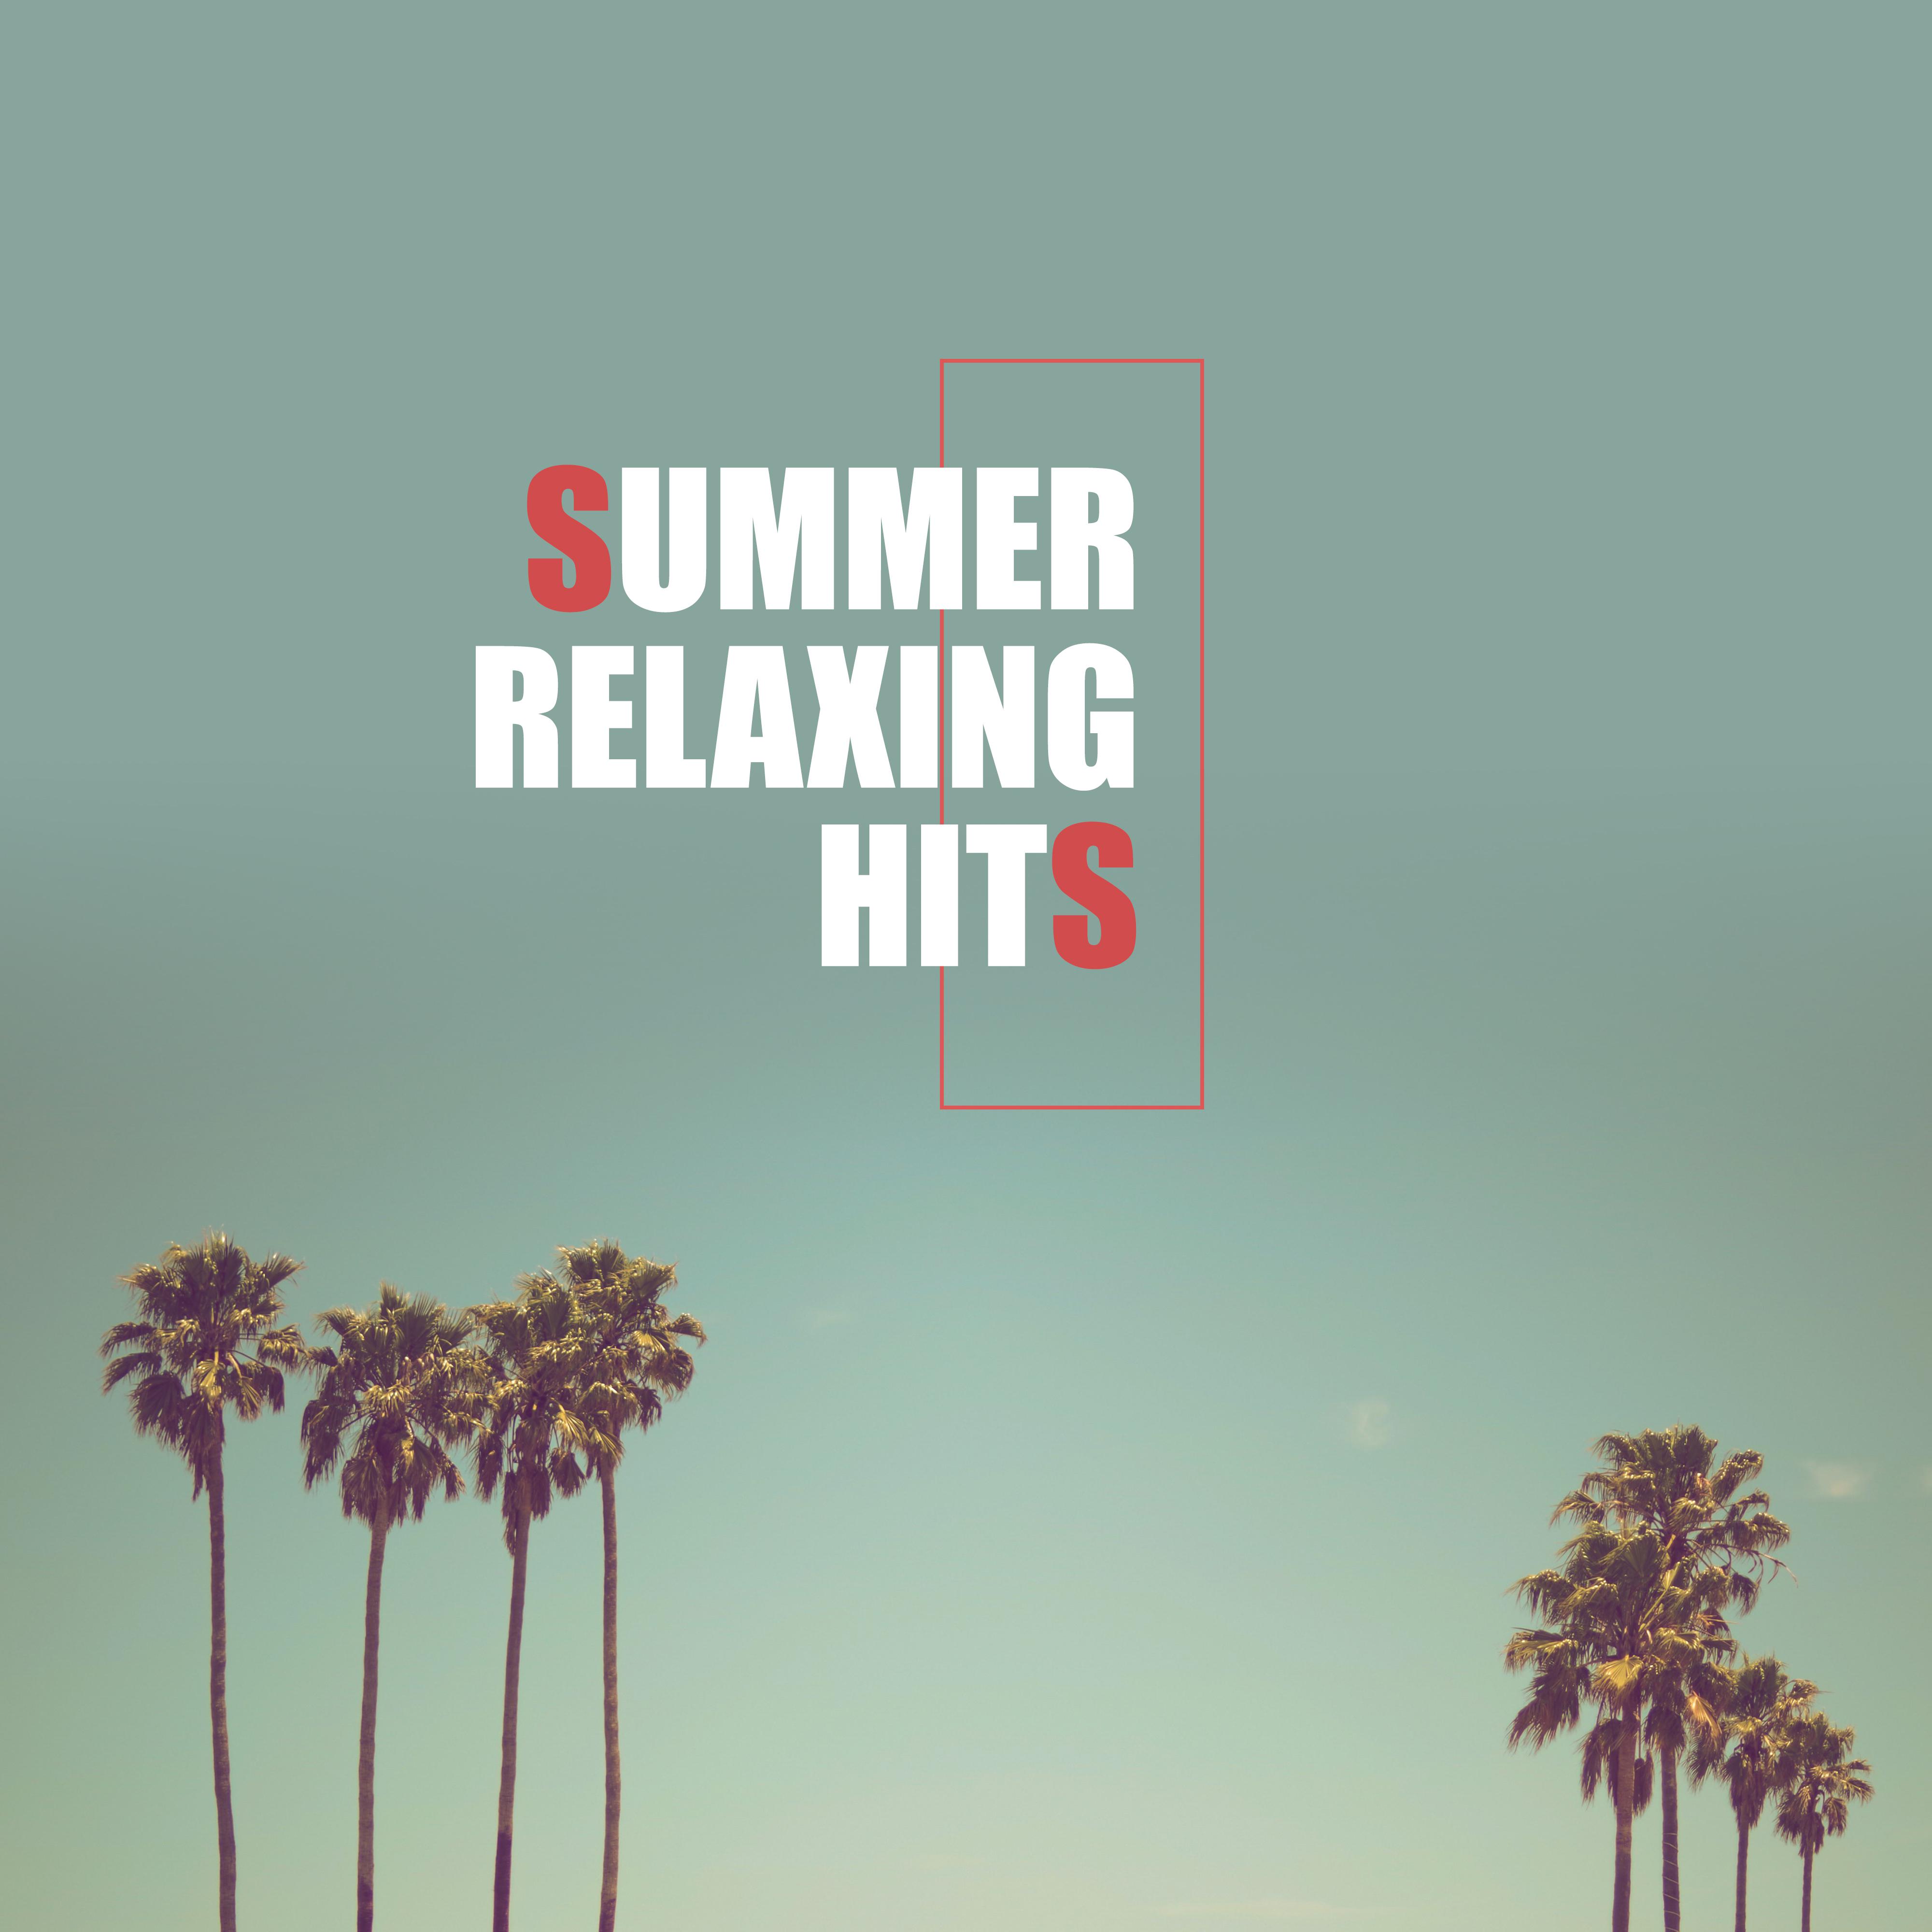 Summer Relaxing Hits  Ibiza 2019, Dance Music, Sunny Chill Out, Summer Music 2019, Ibiza Lounge, Beach Party